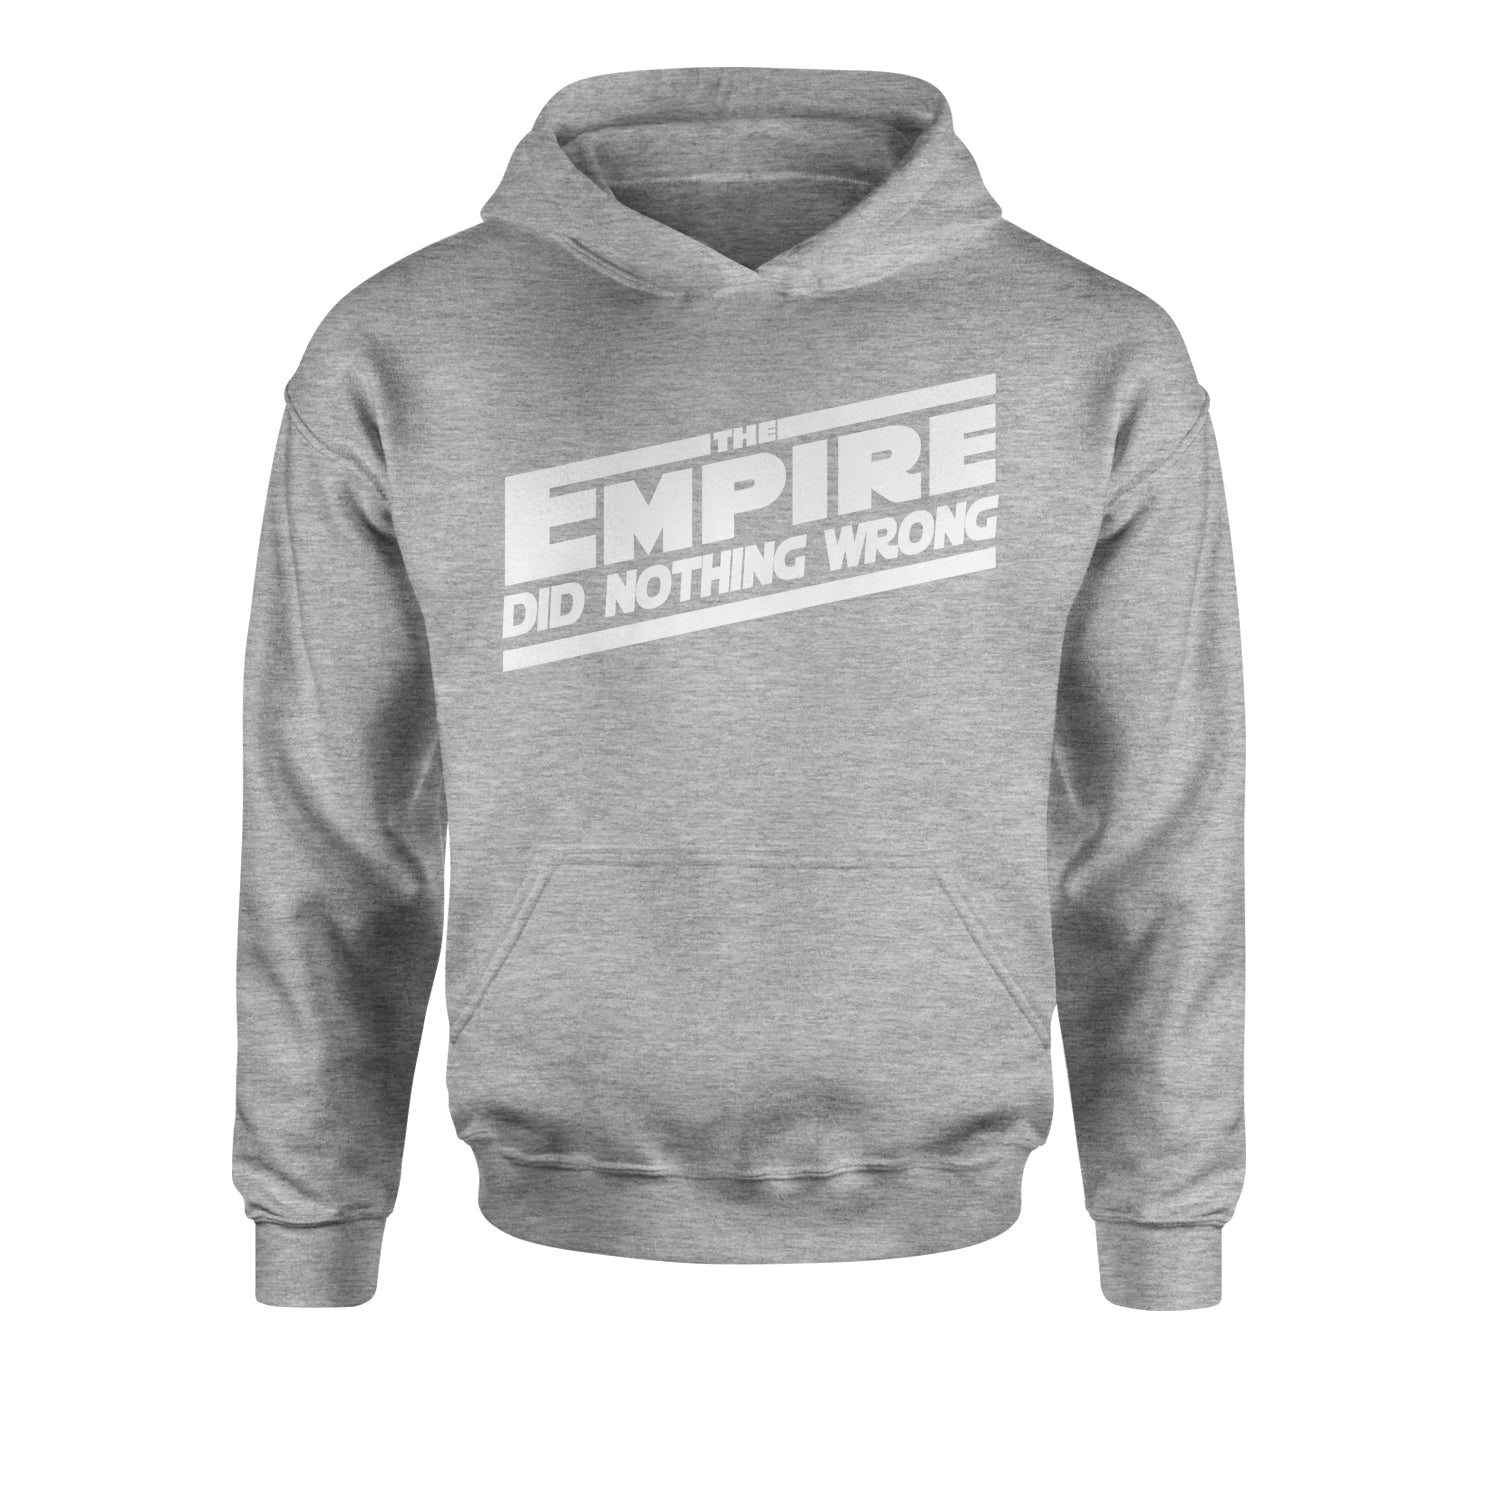 The Empire Did Nothing Wrong Youth-Sized Hoodie rebel, reddit, space, star, storm, subreddit, tropper, wars, youth-sized by Expression Tees